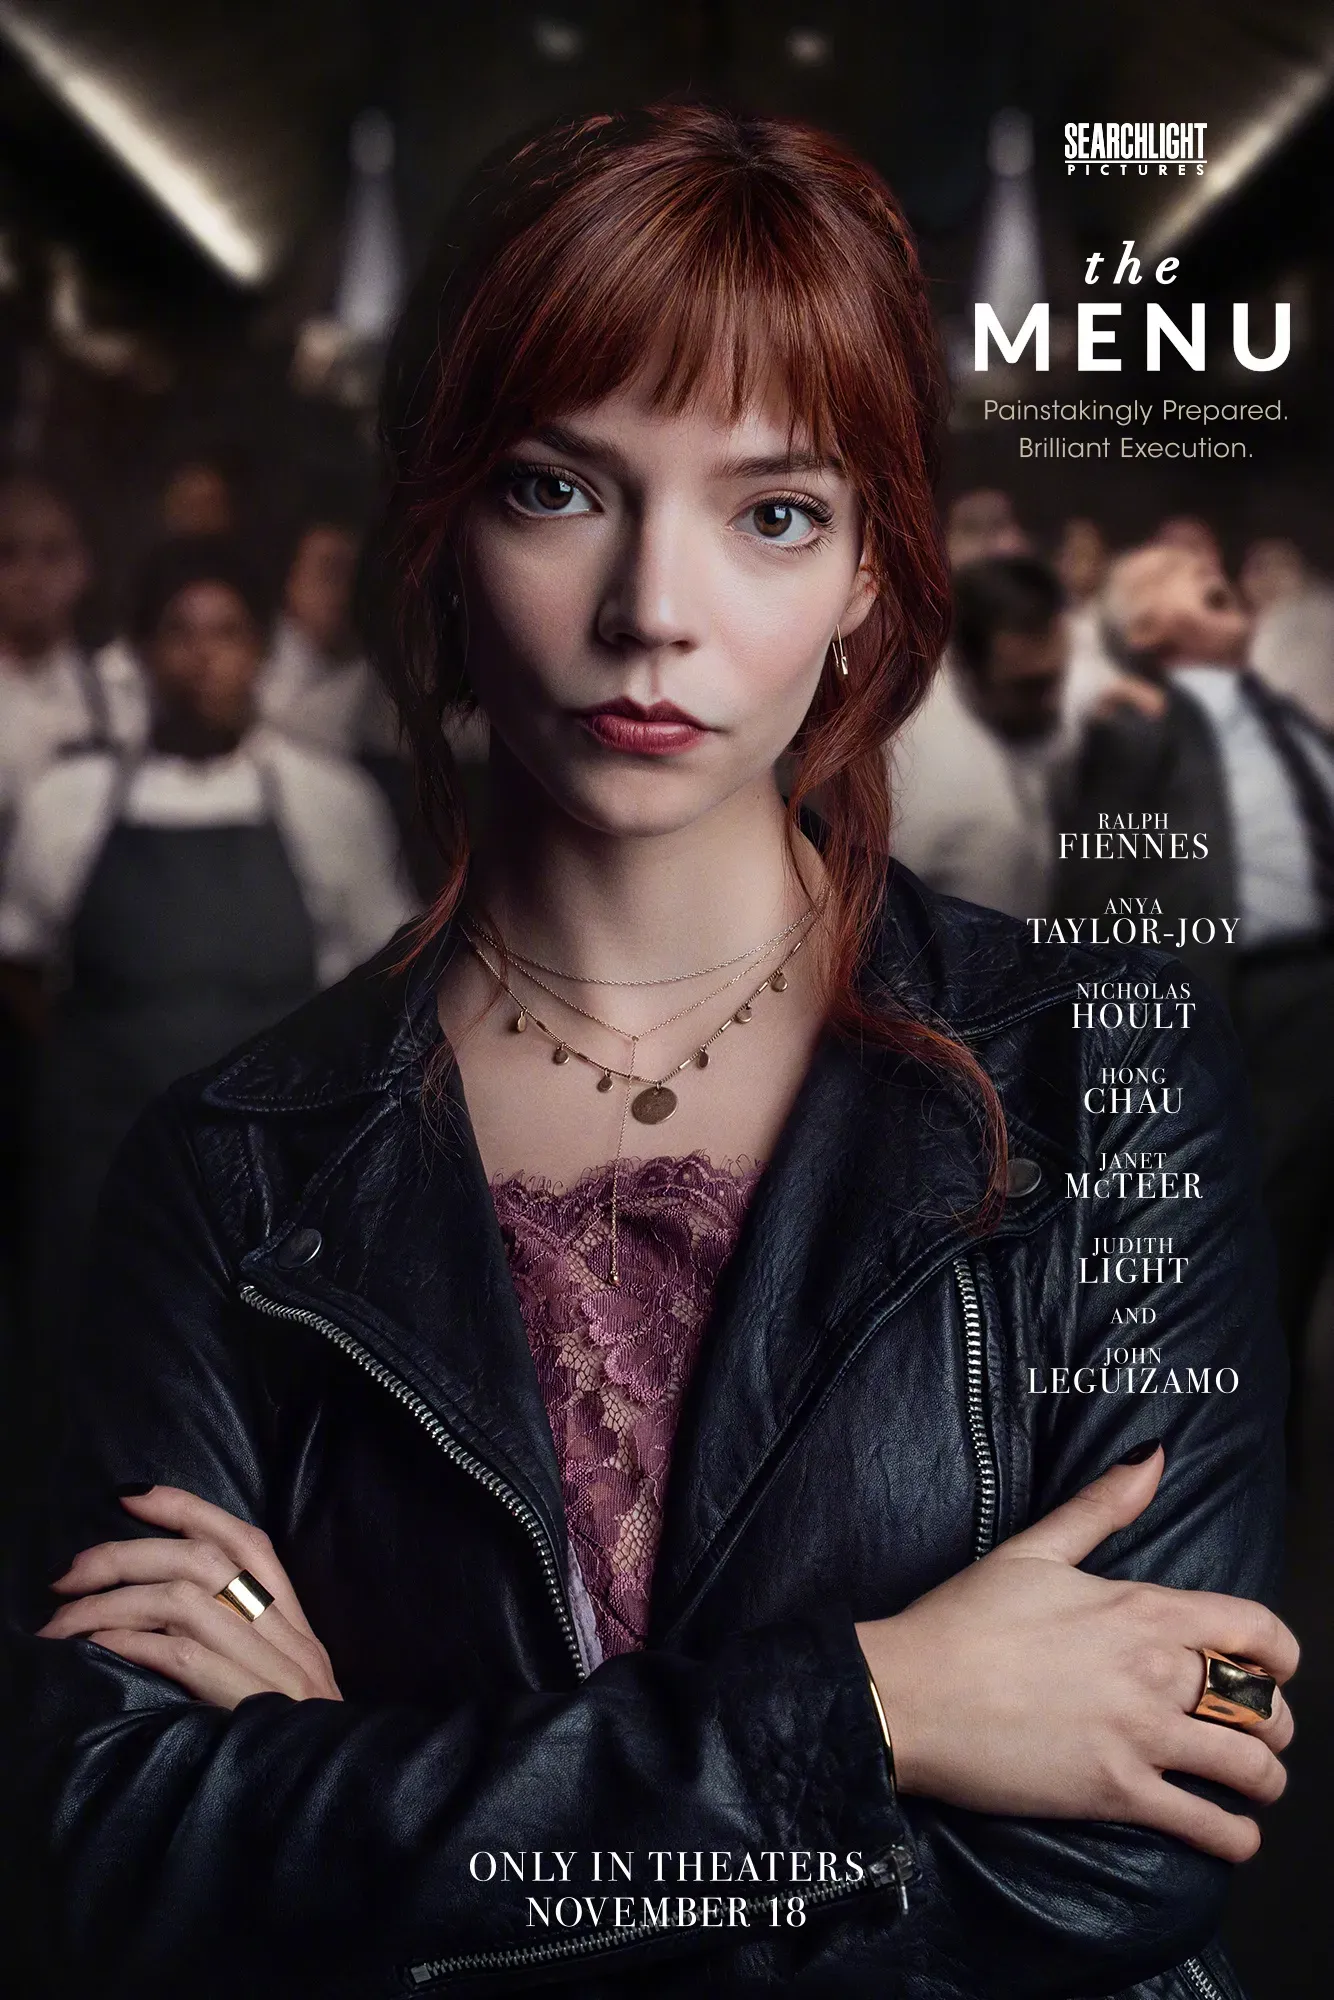 Dark Comedy Psychological Thriller 'The Menu' Releases Official Trailer and Poster | FMV6